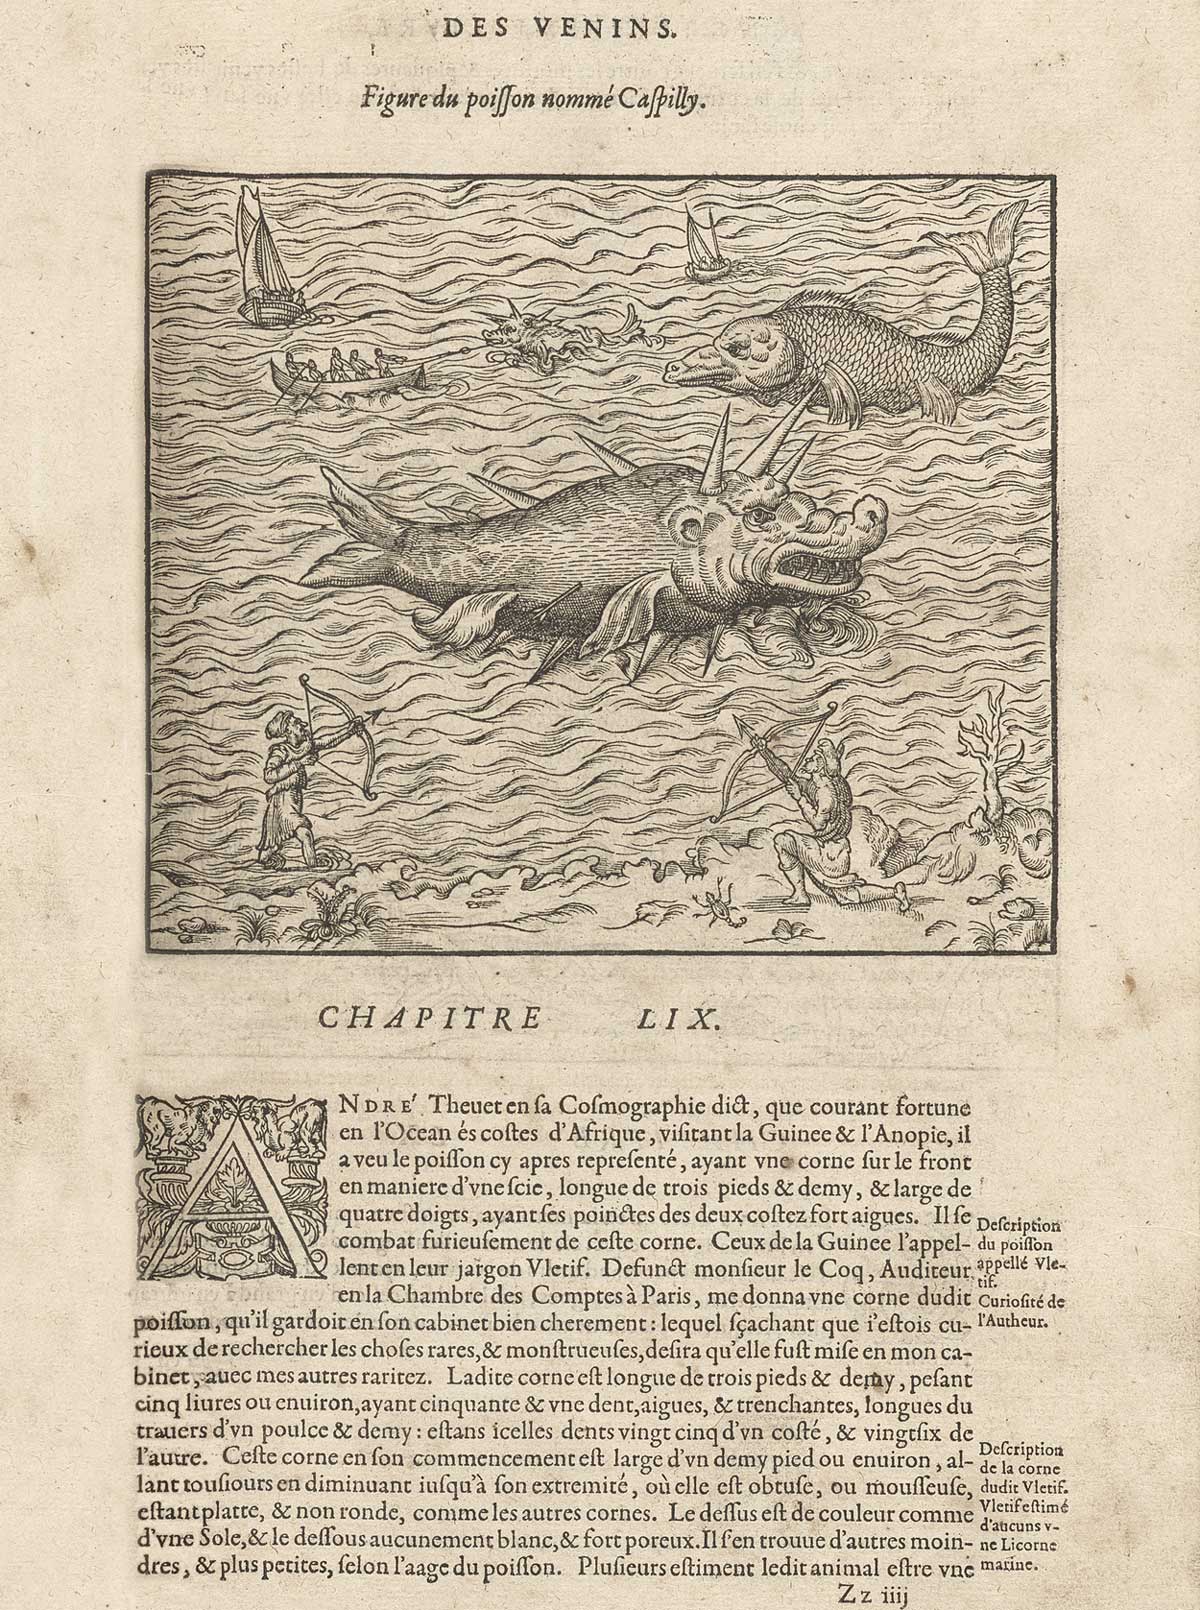 Page VIIICXVII features the Caspilly, a mythological sea-beast, in a seascape that includes a whale and small boats. The animal is shown being hunted from boats and by archers from the sea-shore.